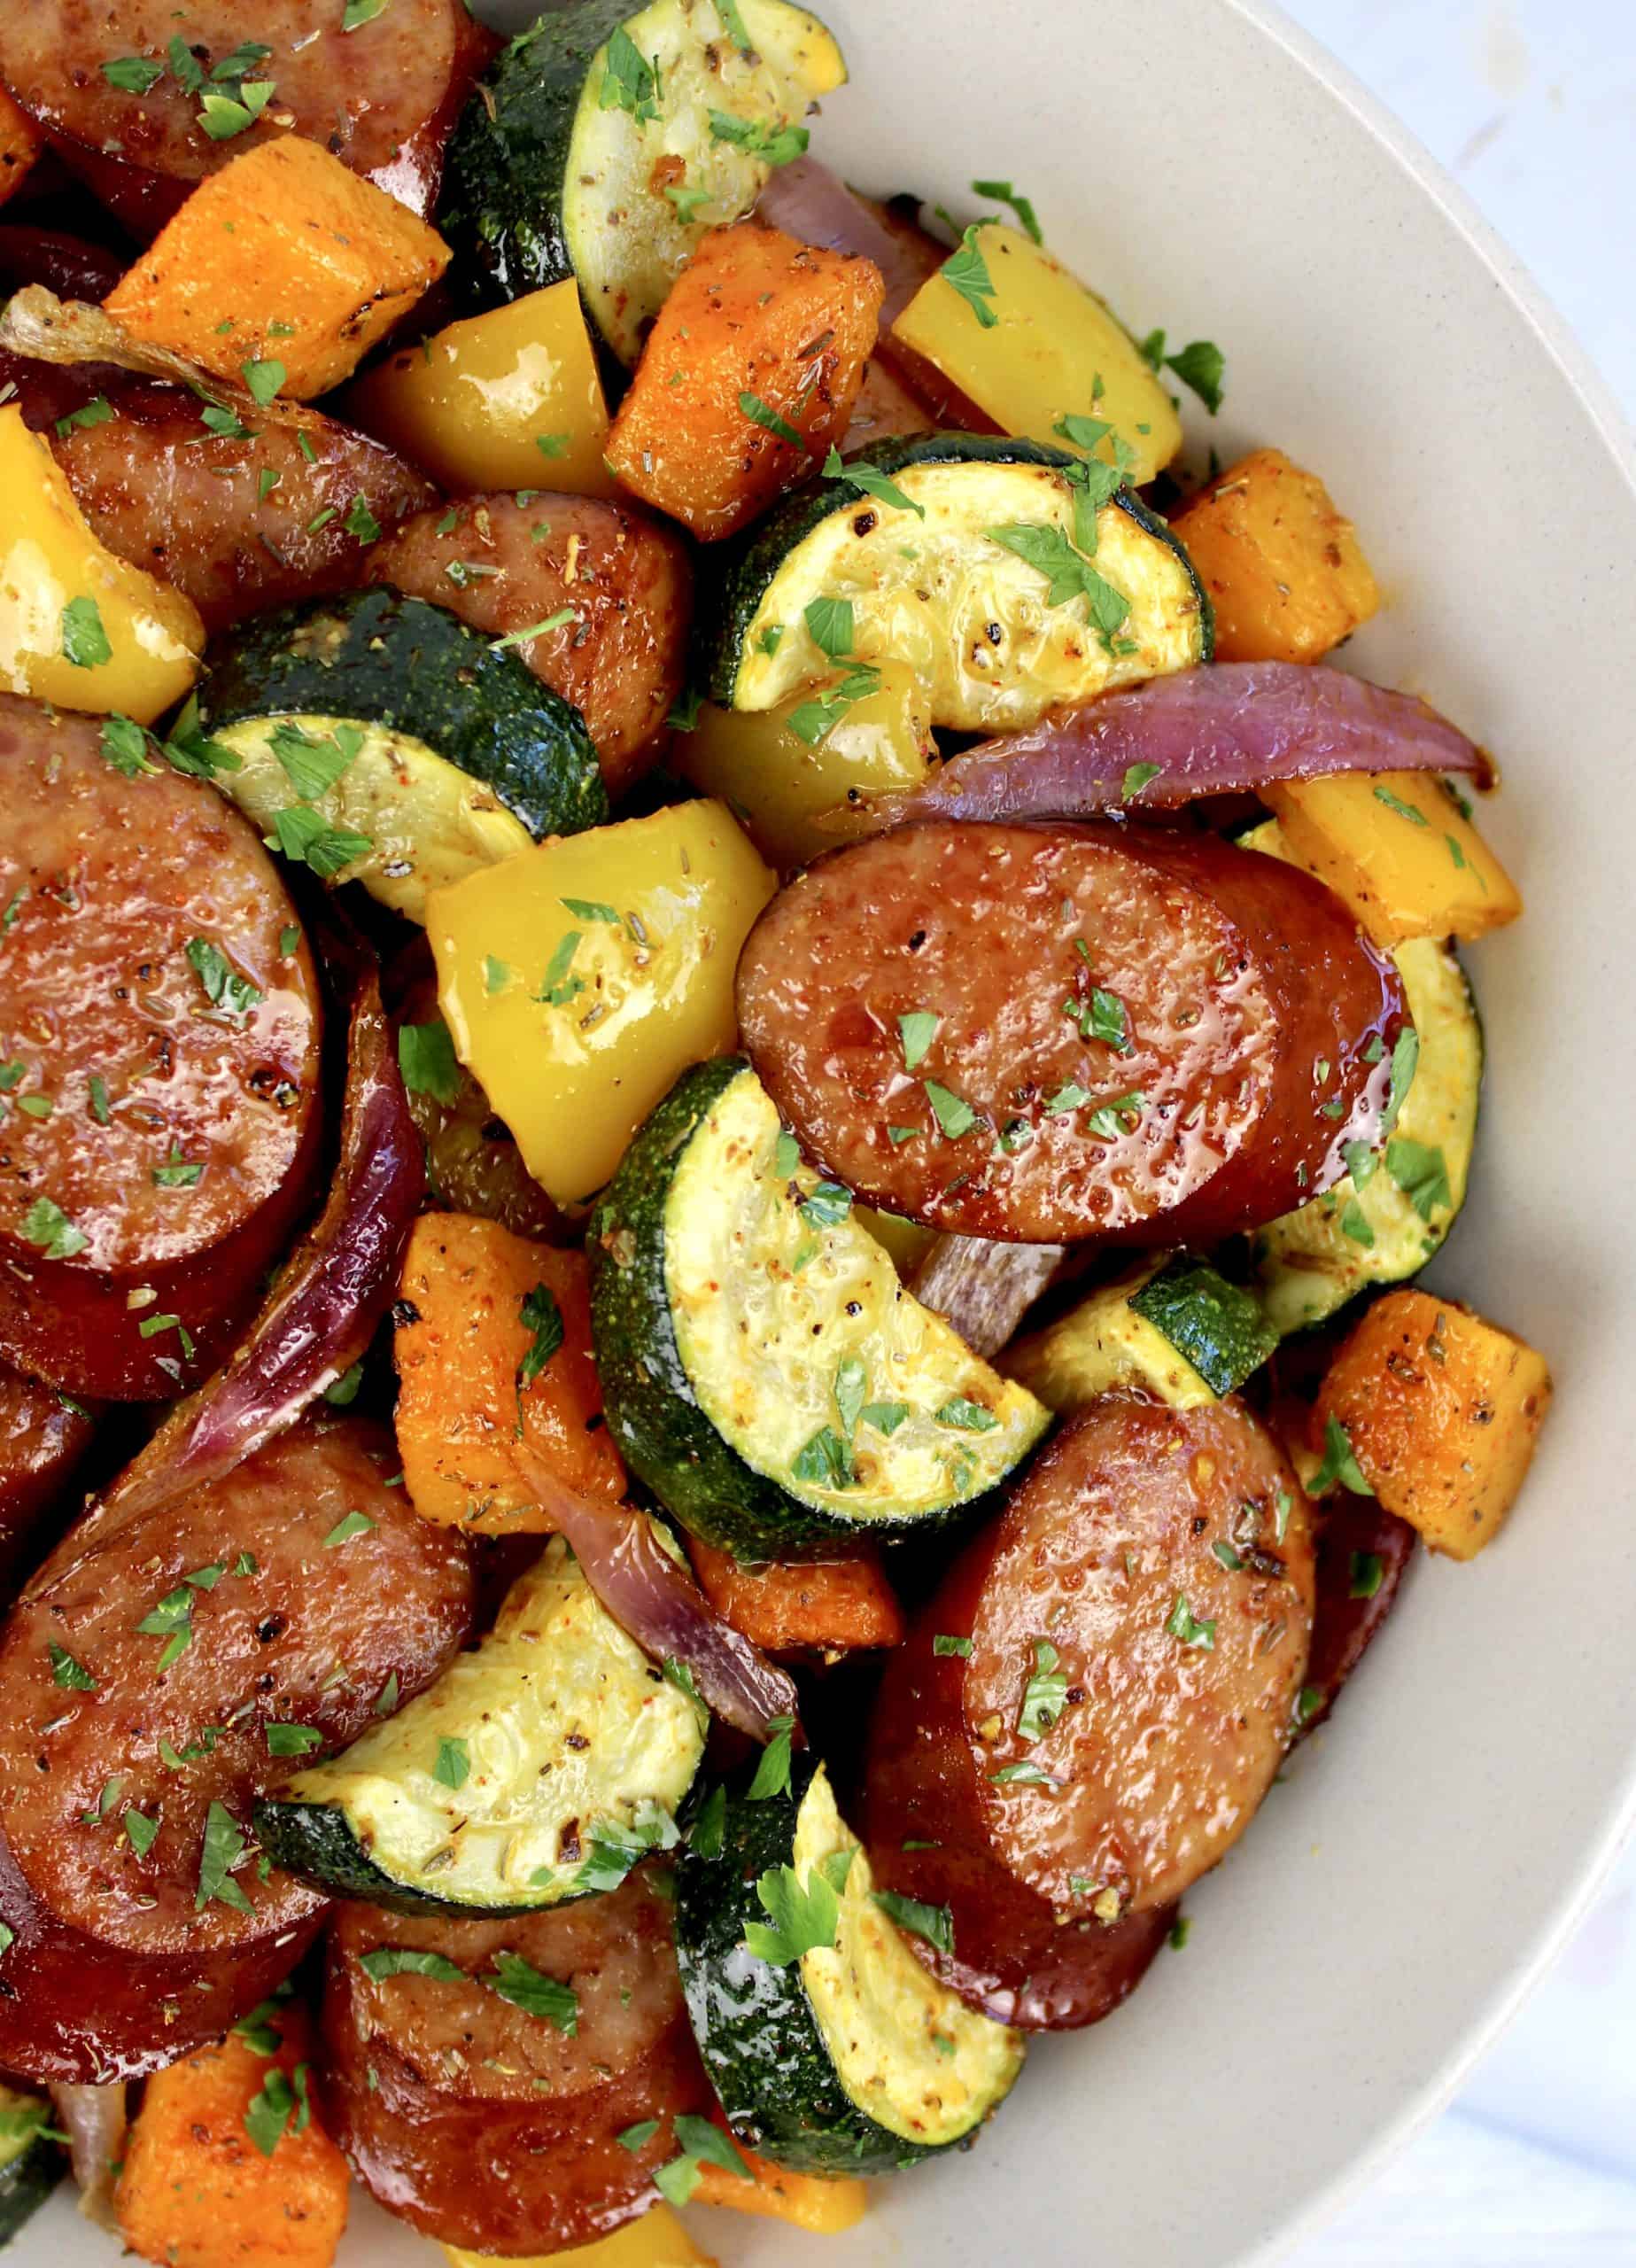 bowl of roasted veggies and sausage in beige bowl